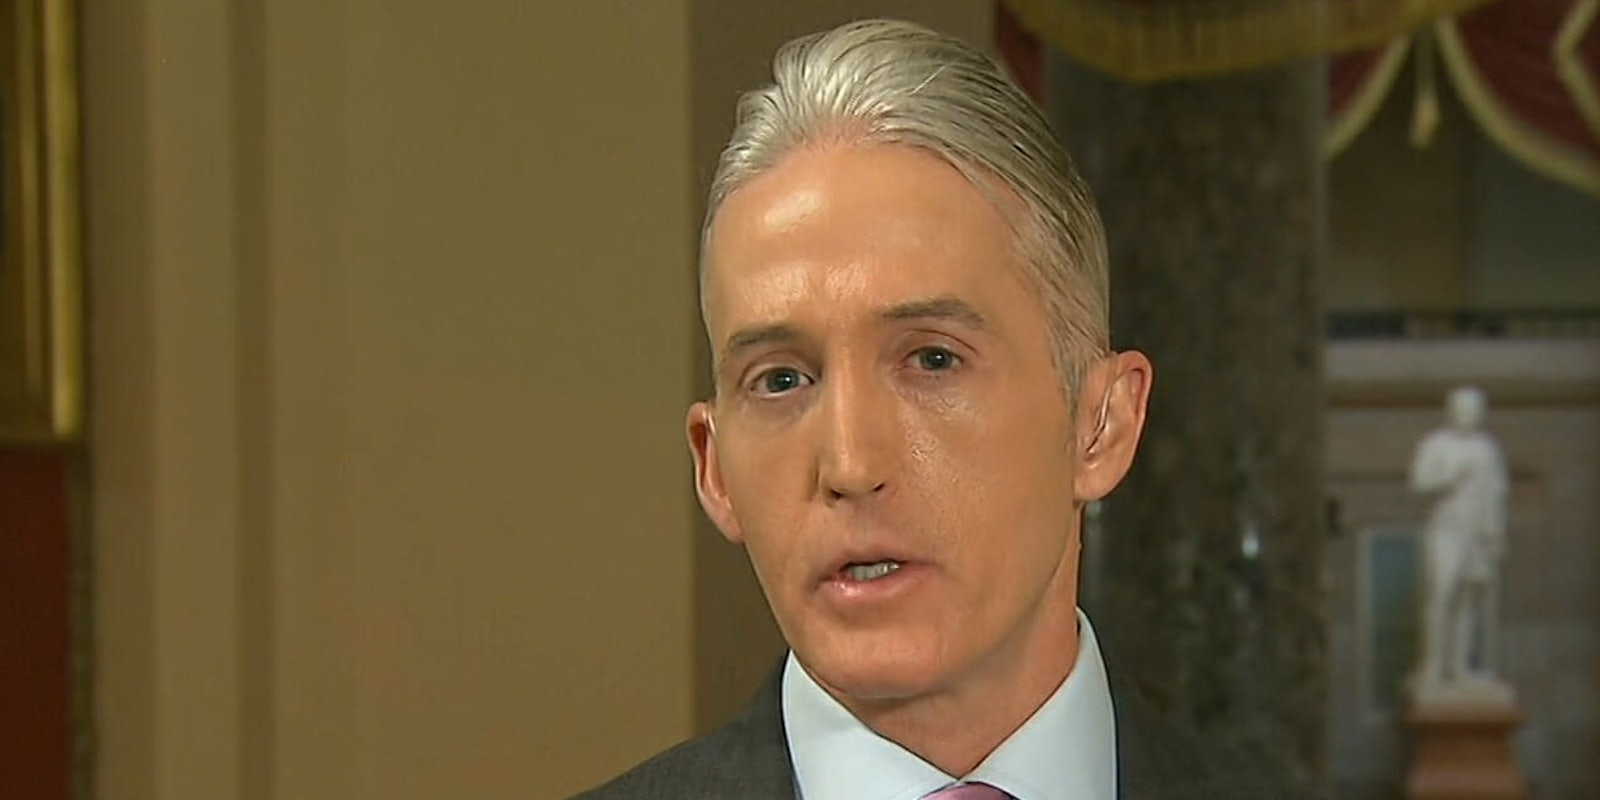 Rep. Trey Gowdy said the House Oversight Committee is investigating the White House's employment of Rob Porter following allegations of domestic abuse.